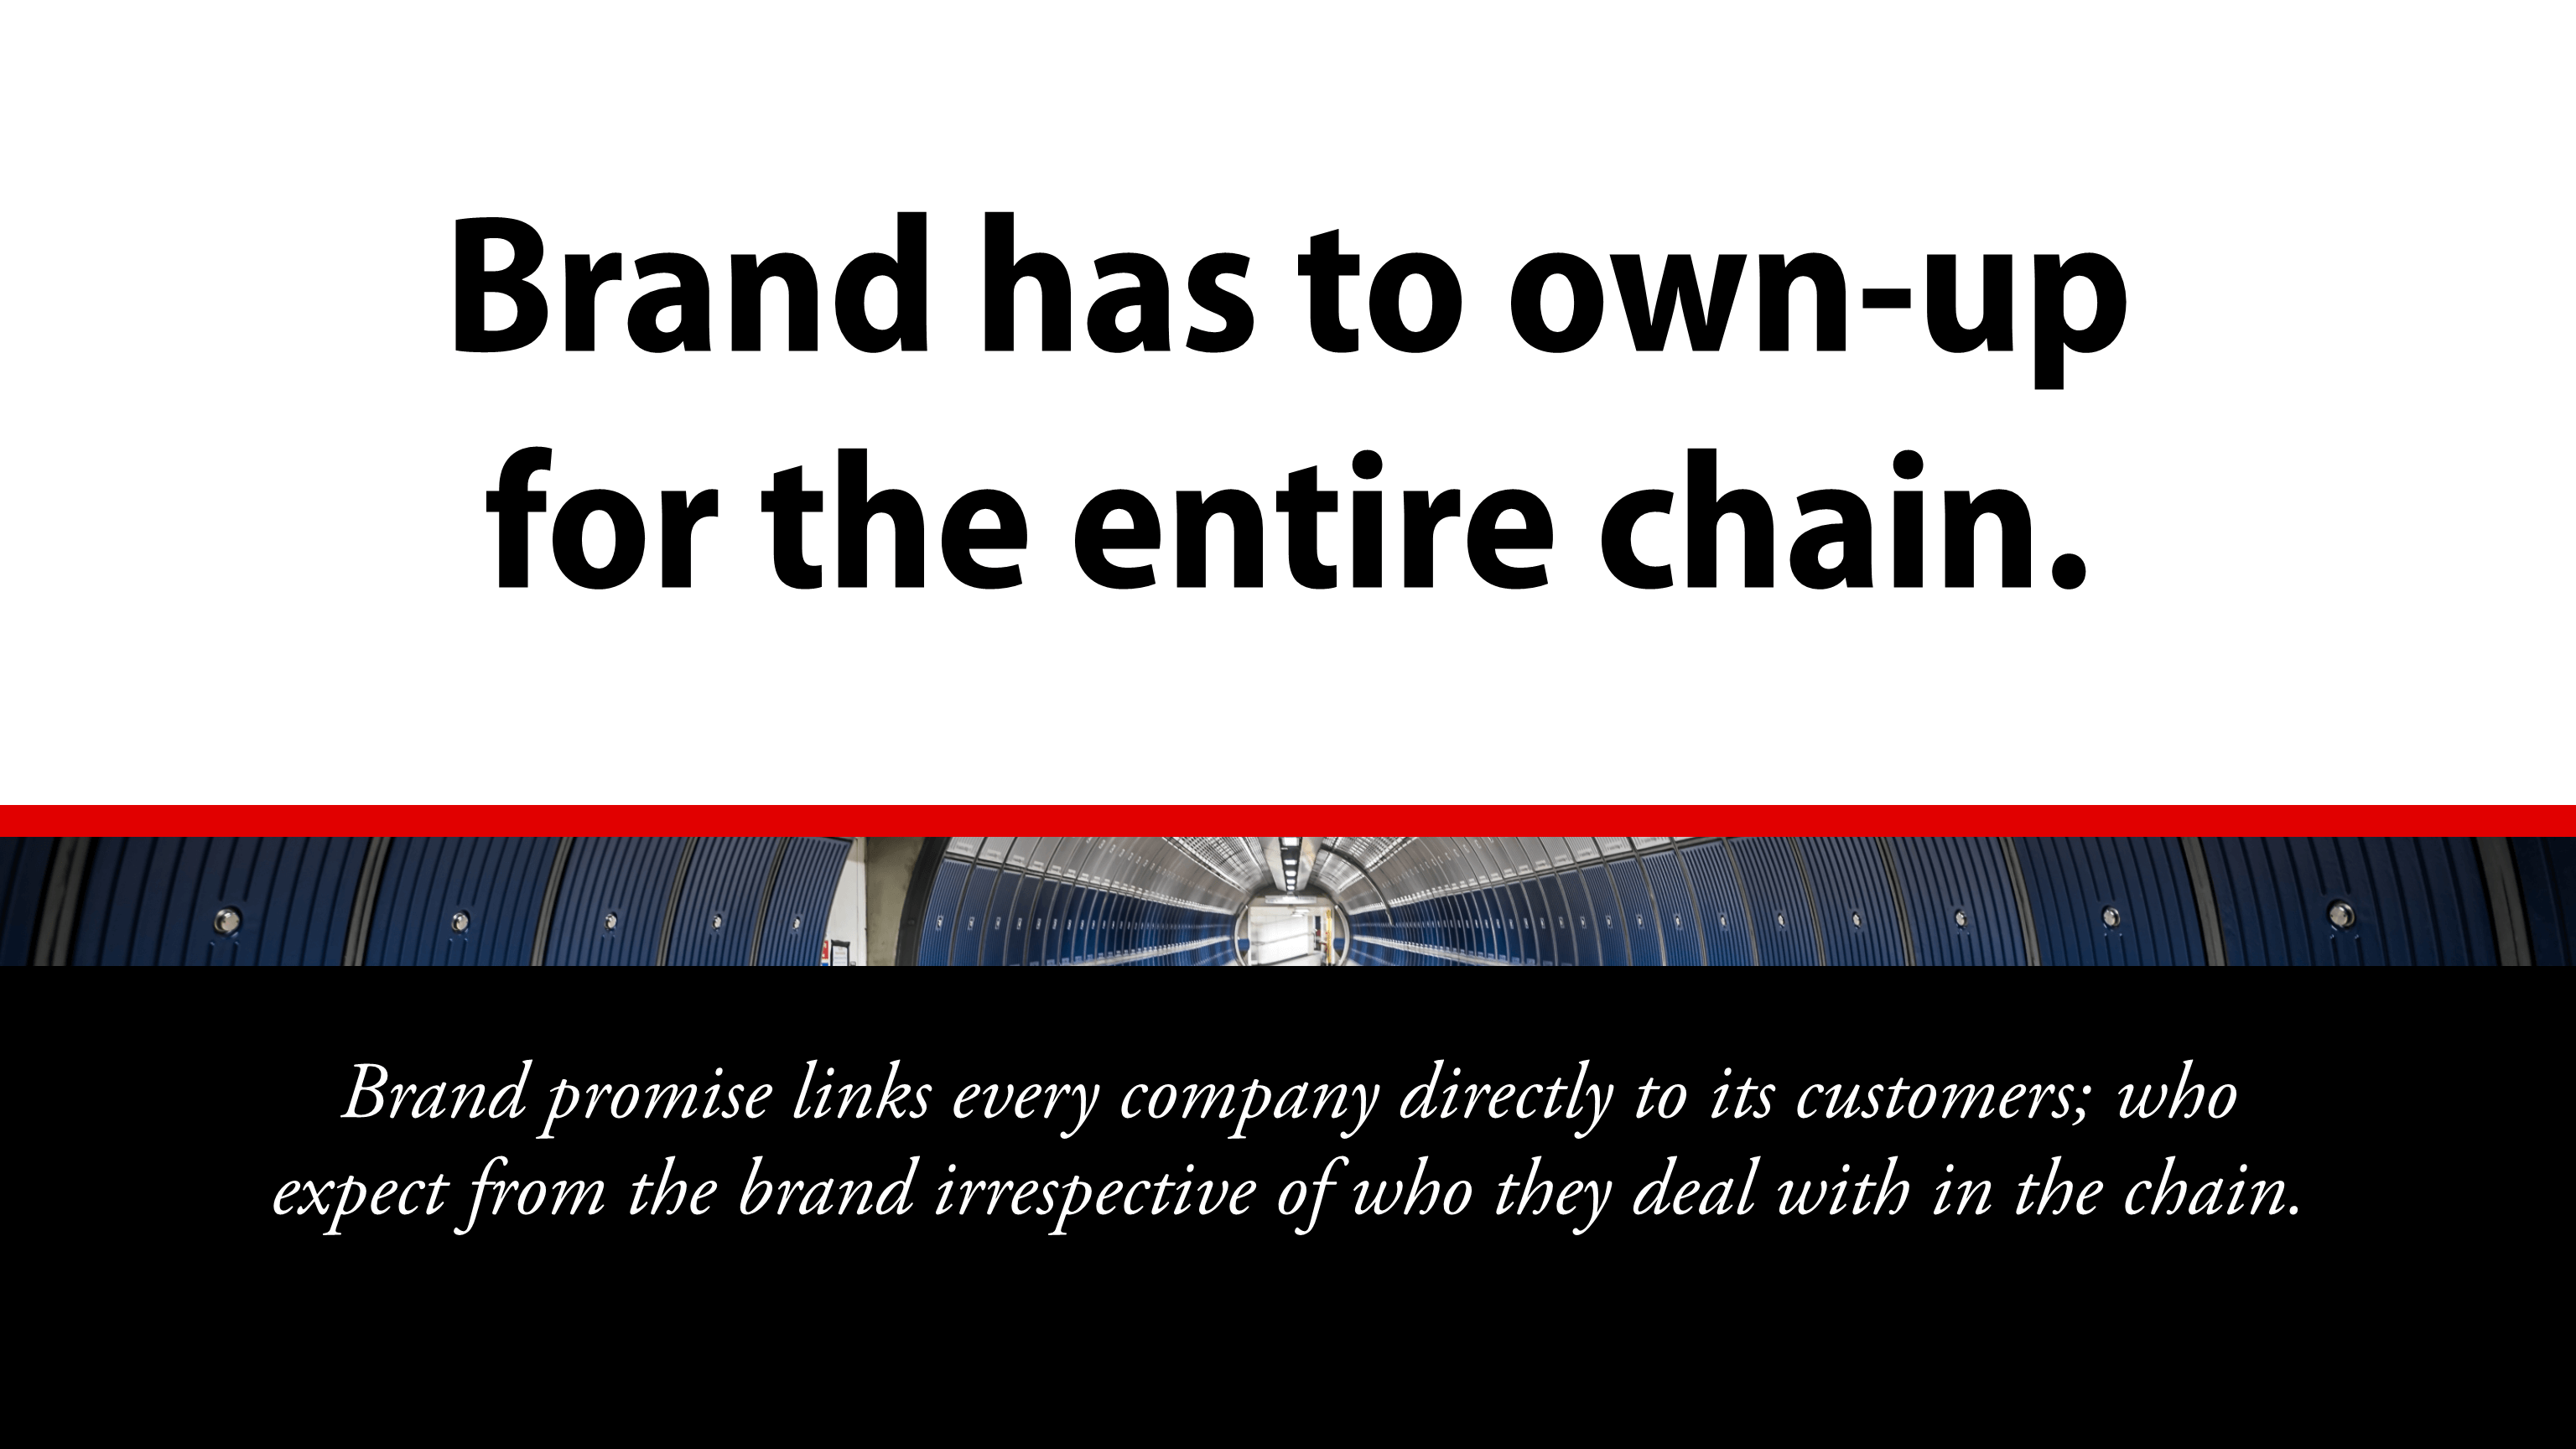 Brand has to own-up for the entire chain